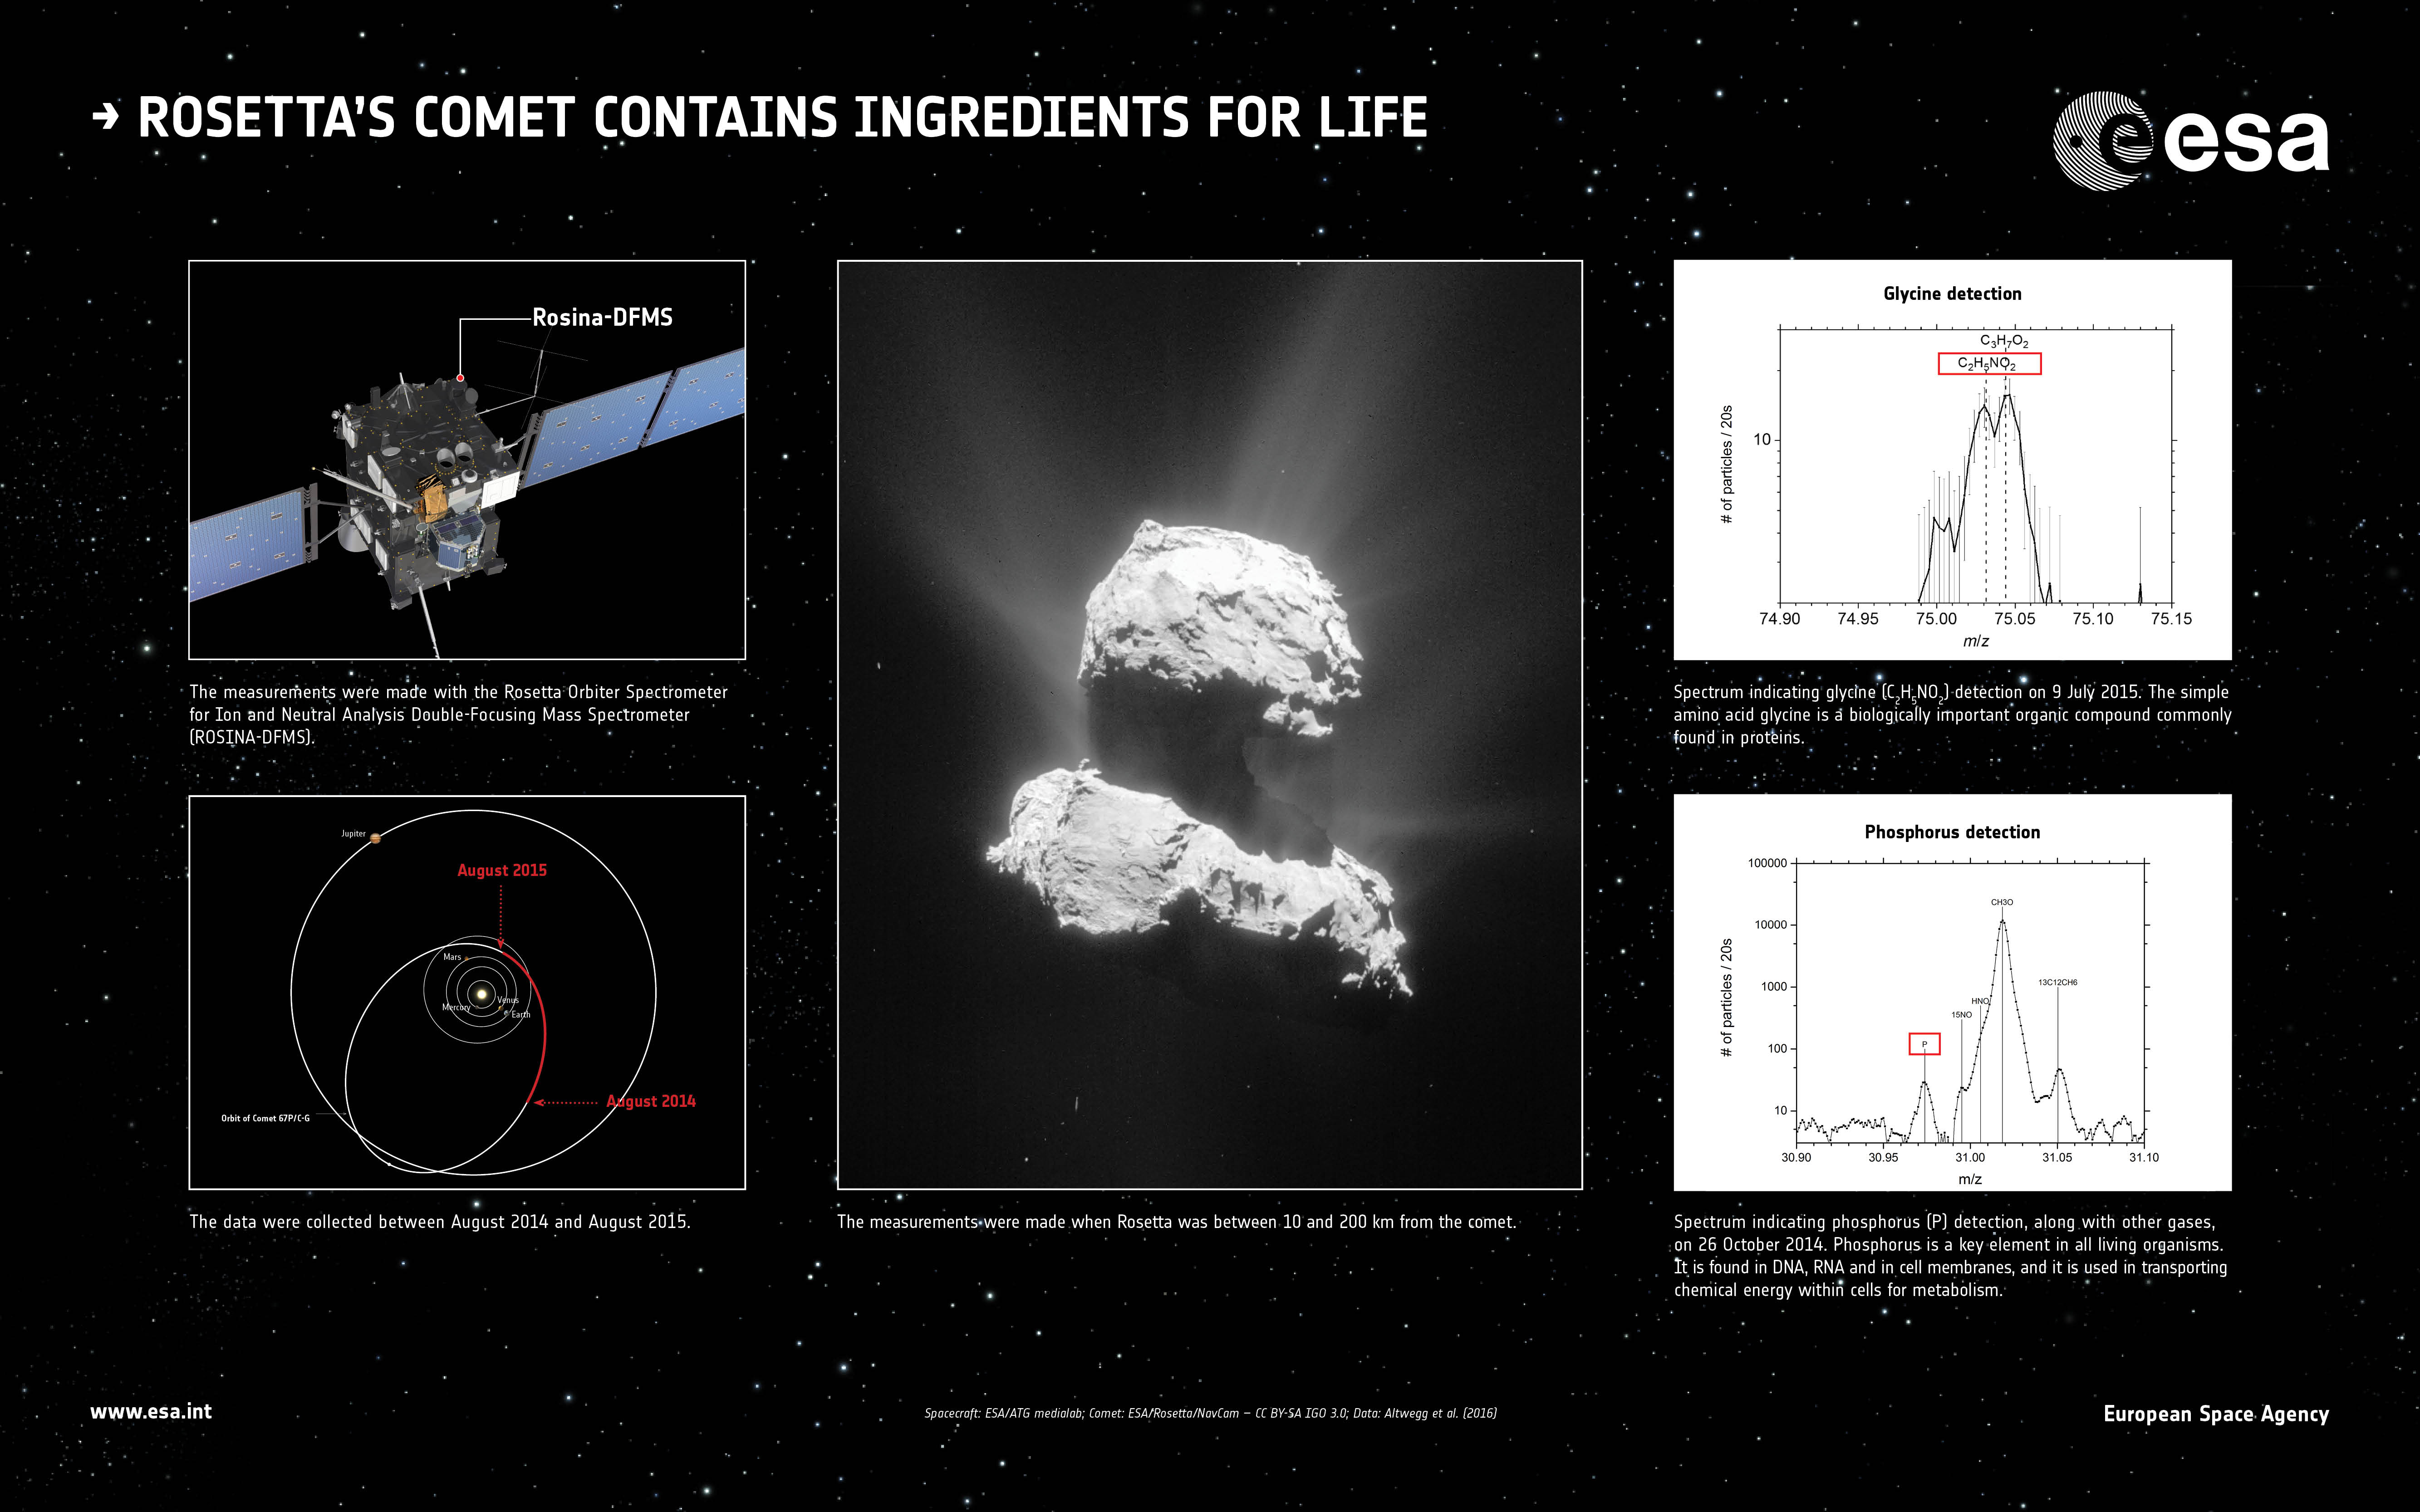 The Rosina-DFMS instrument on Rosetta has detected ingredients considered important for life as we know it on Earth, in the coma of Comet 67P/Churyumov–Gerasimenko.